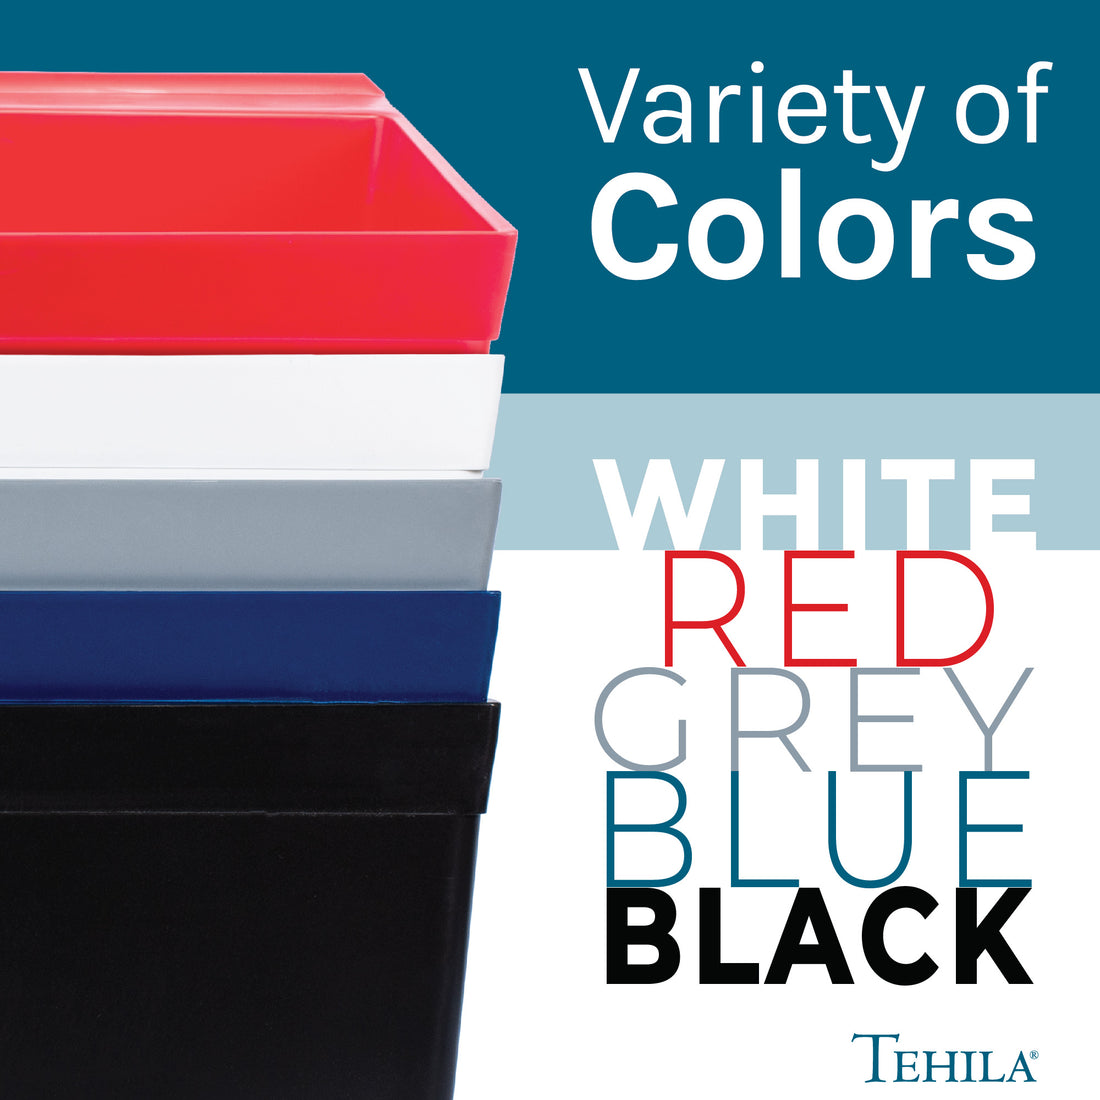 Standard Utility Sinks with the Variety of Colors White | Red | Grey | Blue | Black